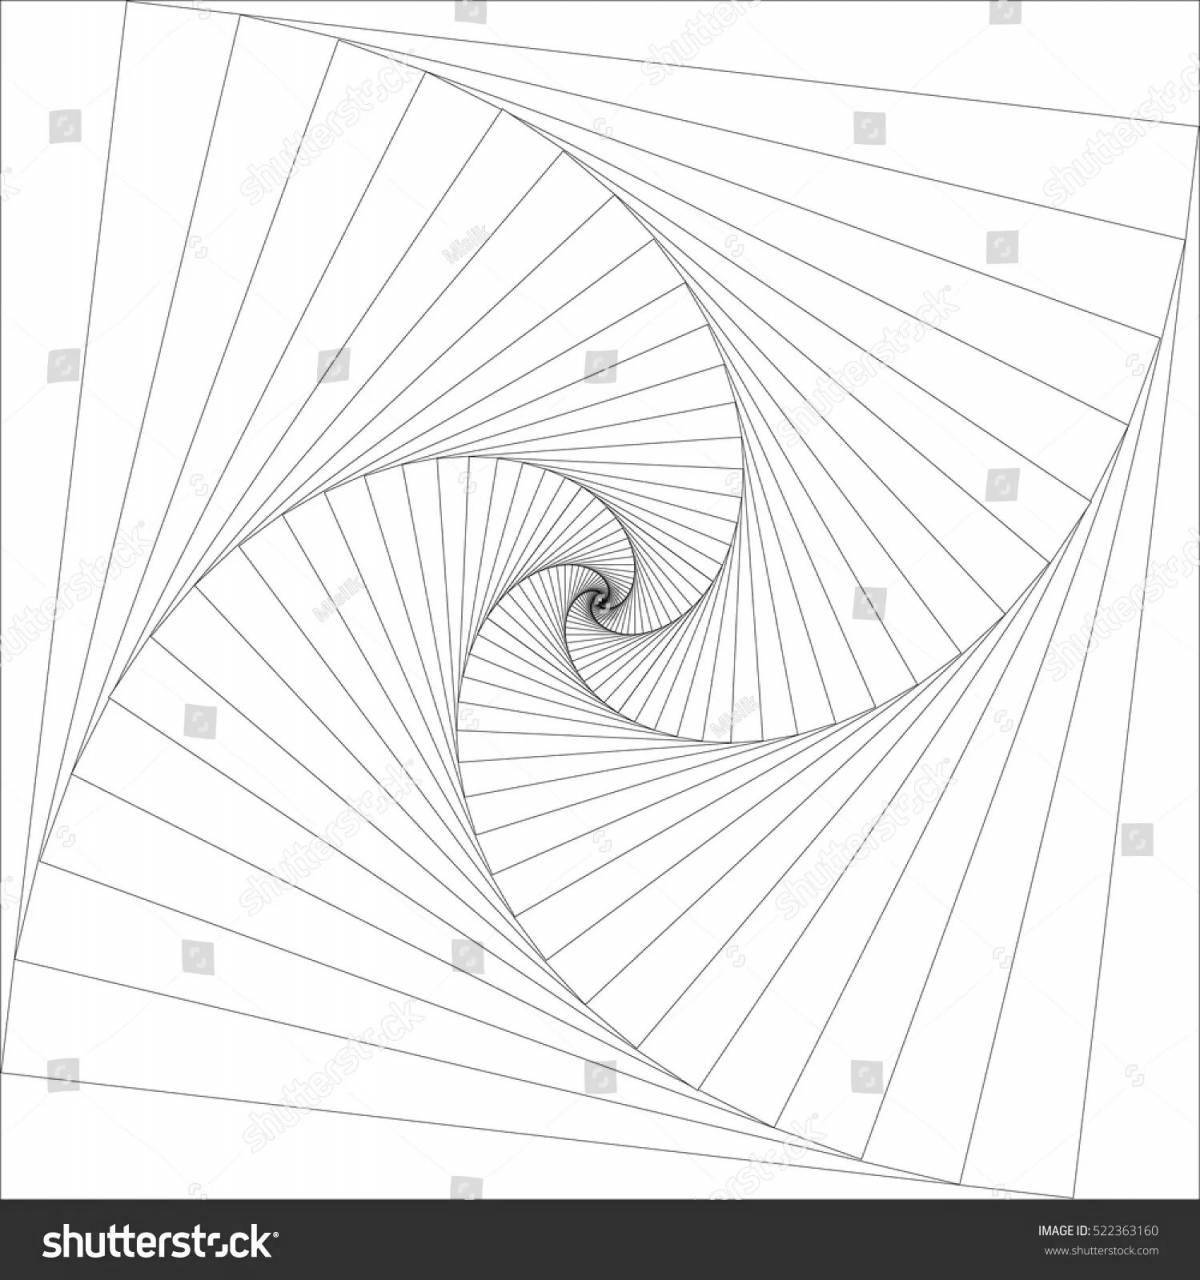 Intriguing spiral drawing page